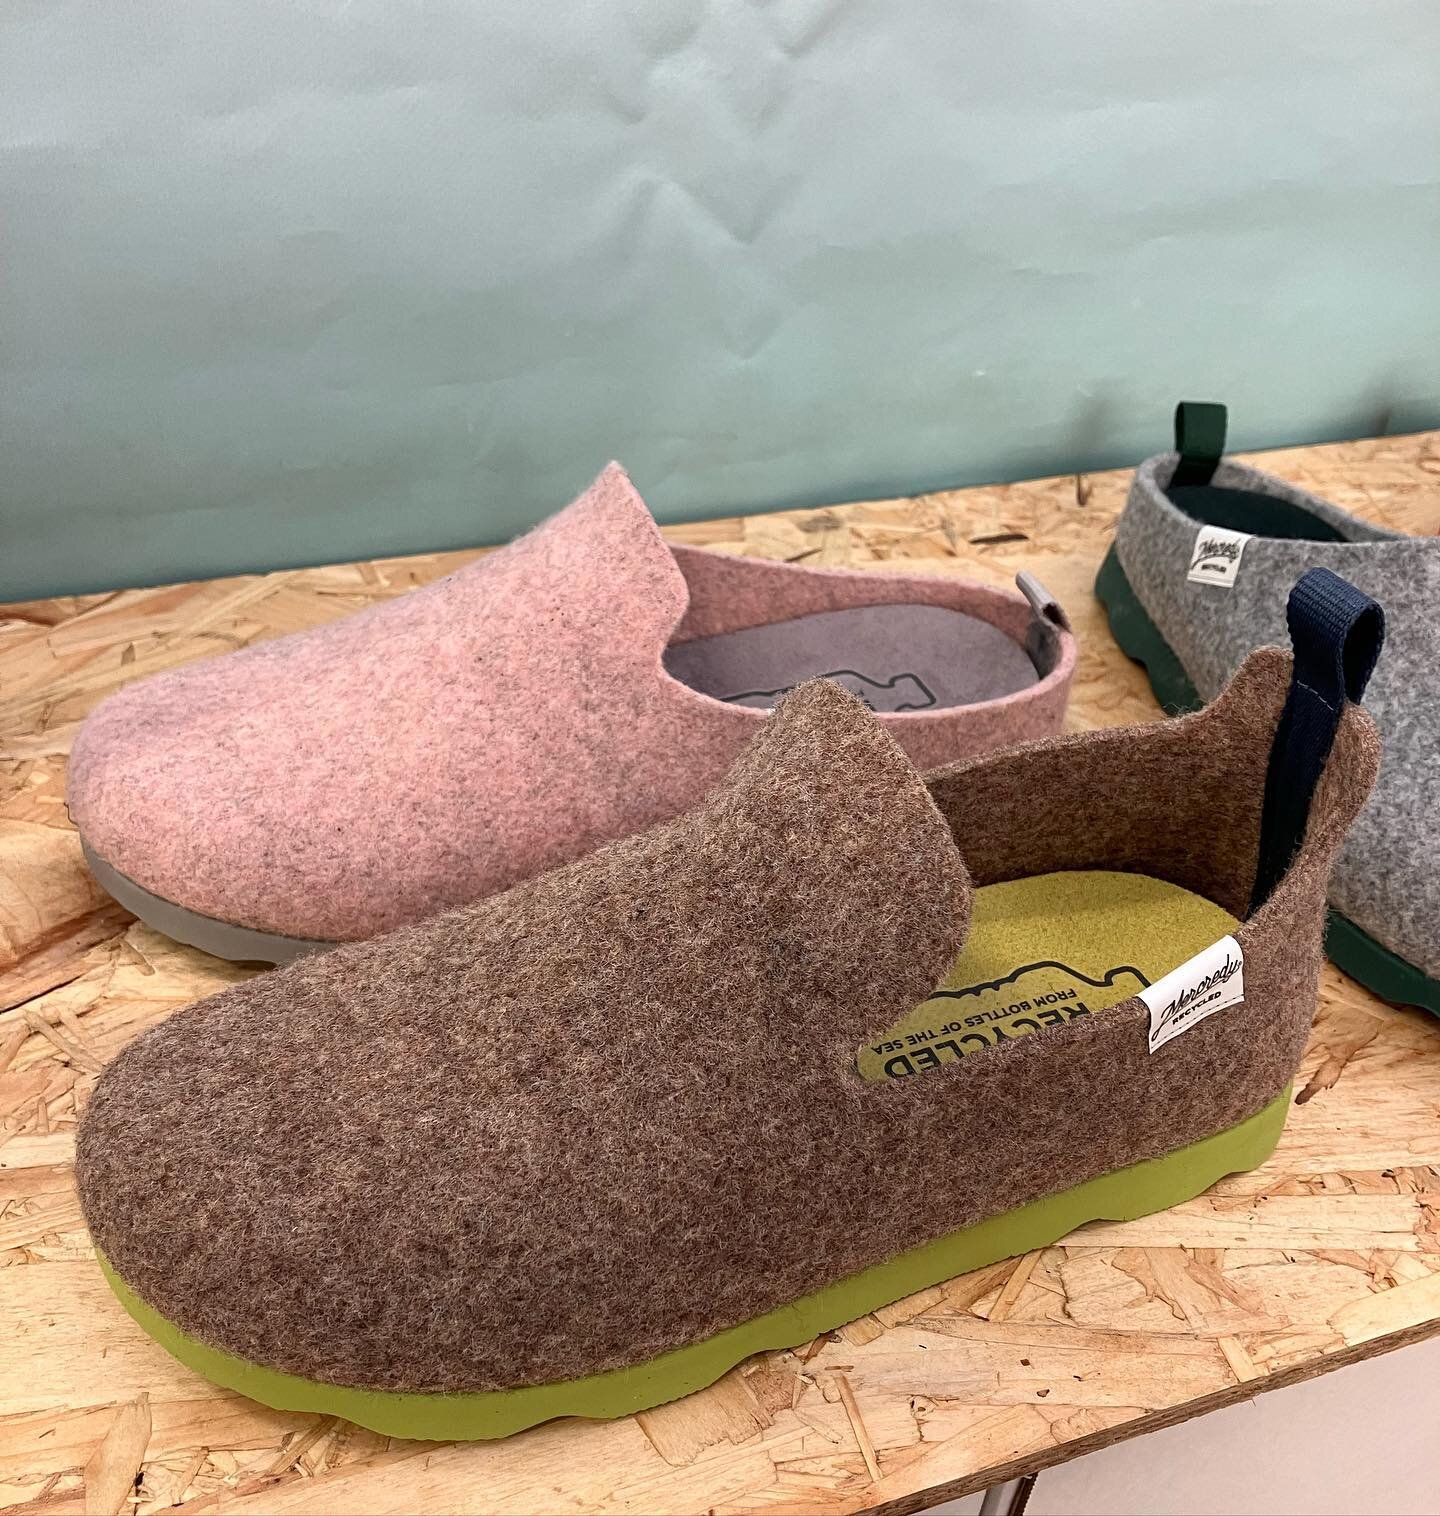 New chunky soled &lsquo;slippers/outdoor footwear from #Mercredy at #topdrawerlondon stand 207.